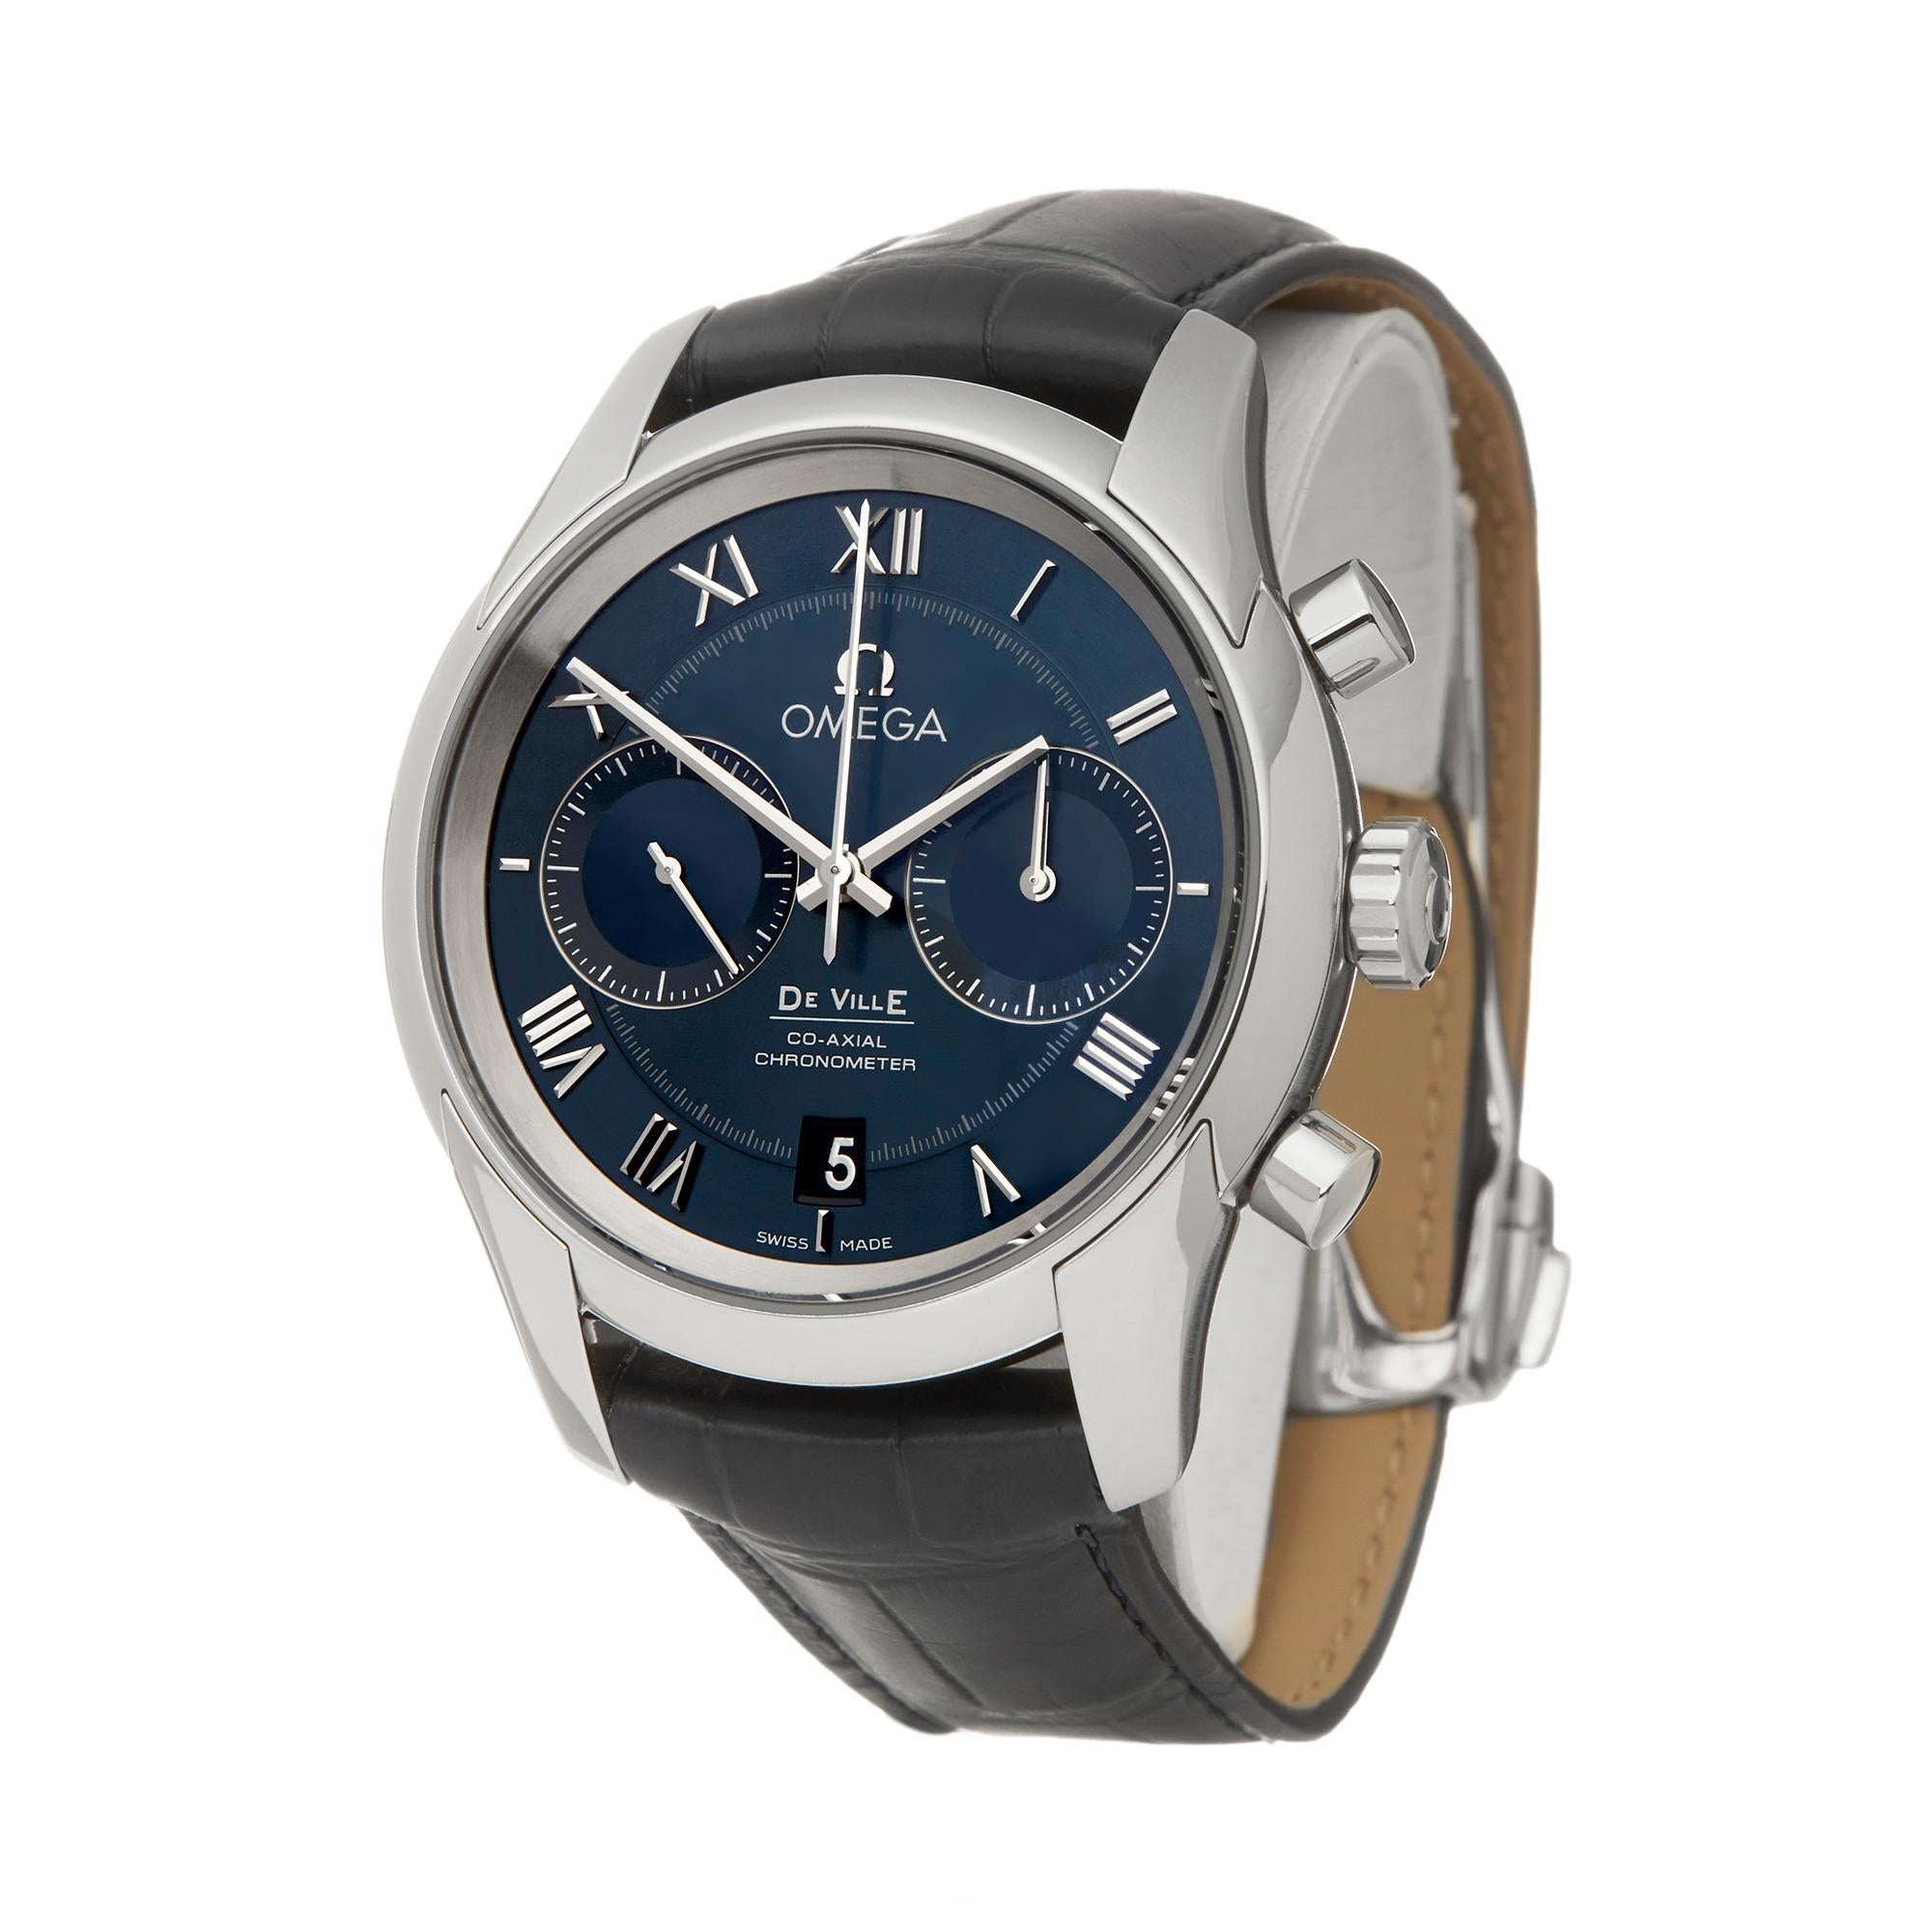 Reference: W5821
Brand: Omega
Model: DeVille
Model Reference: 431.13.42.51.03.001
Age: Circa 2010's
Gender: Men's
Box and Papers:Box Only
Dial: Blue Roman
Glass: Sapphire Crystal
Movement: Automatic
Water Resistance: To Manufacturers